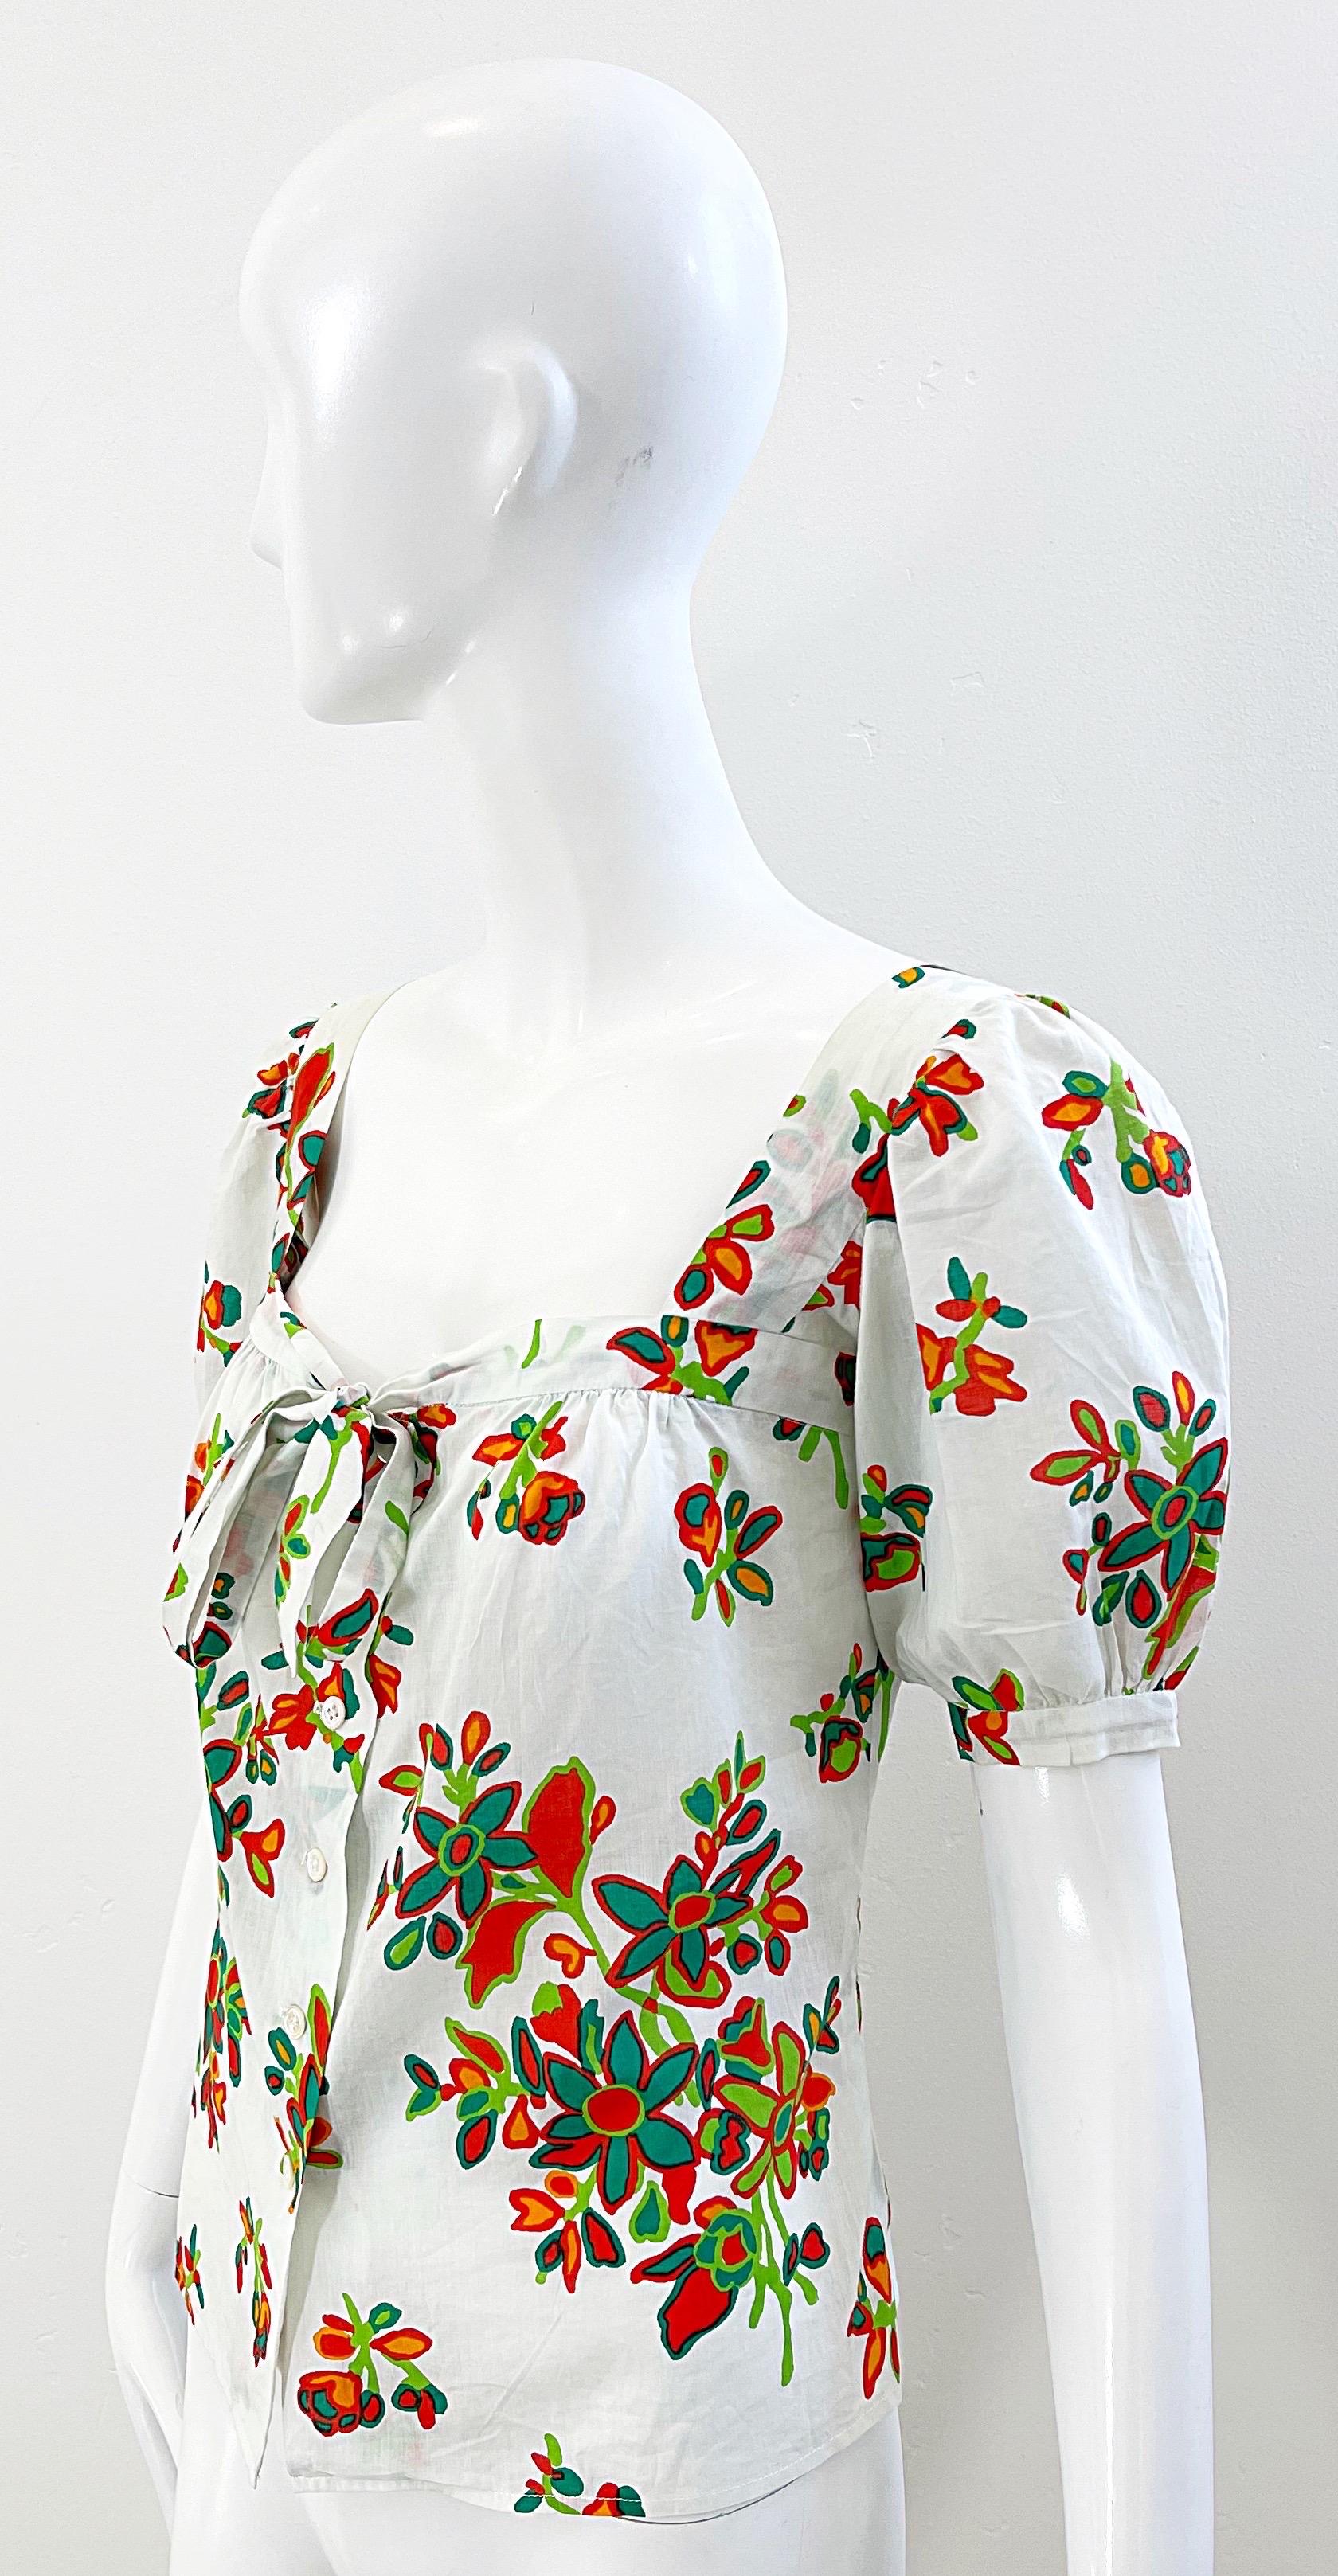 1970s Yves Saint Laurent YSL Cotton Abstract Floral Print Size 34 Blouse 70s Top For Sale 2